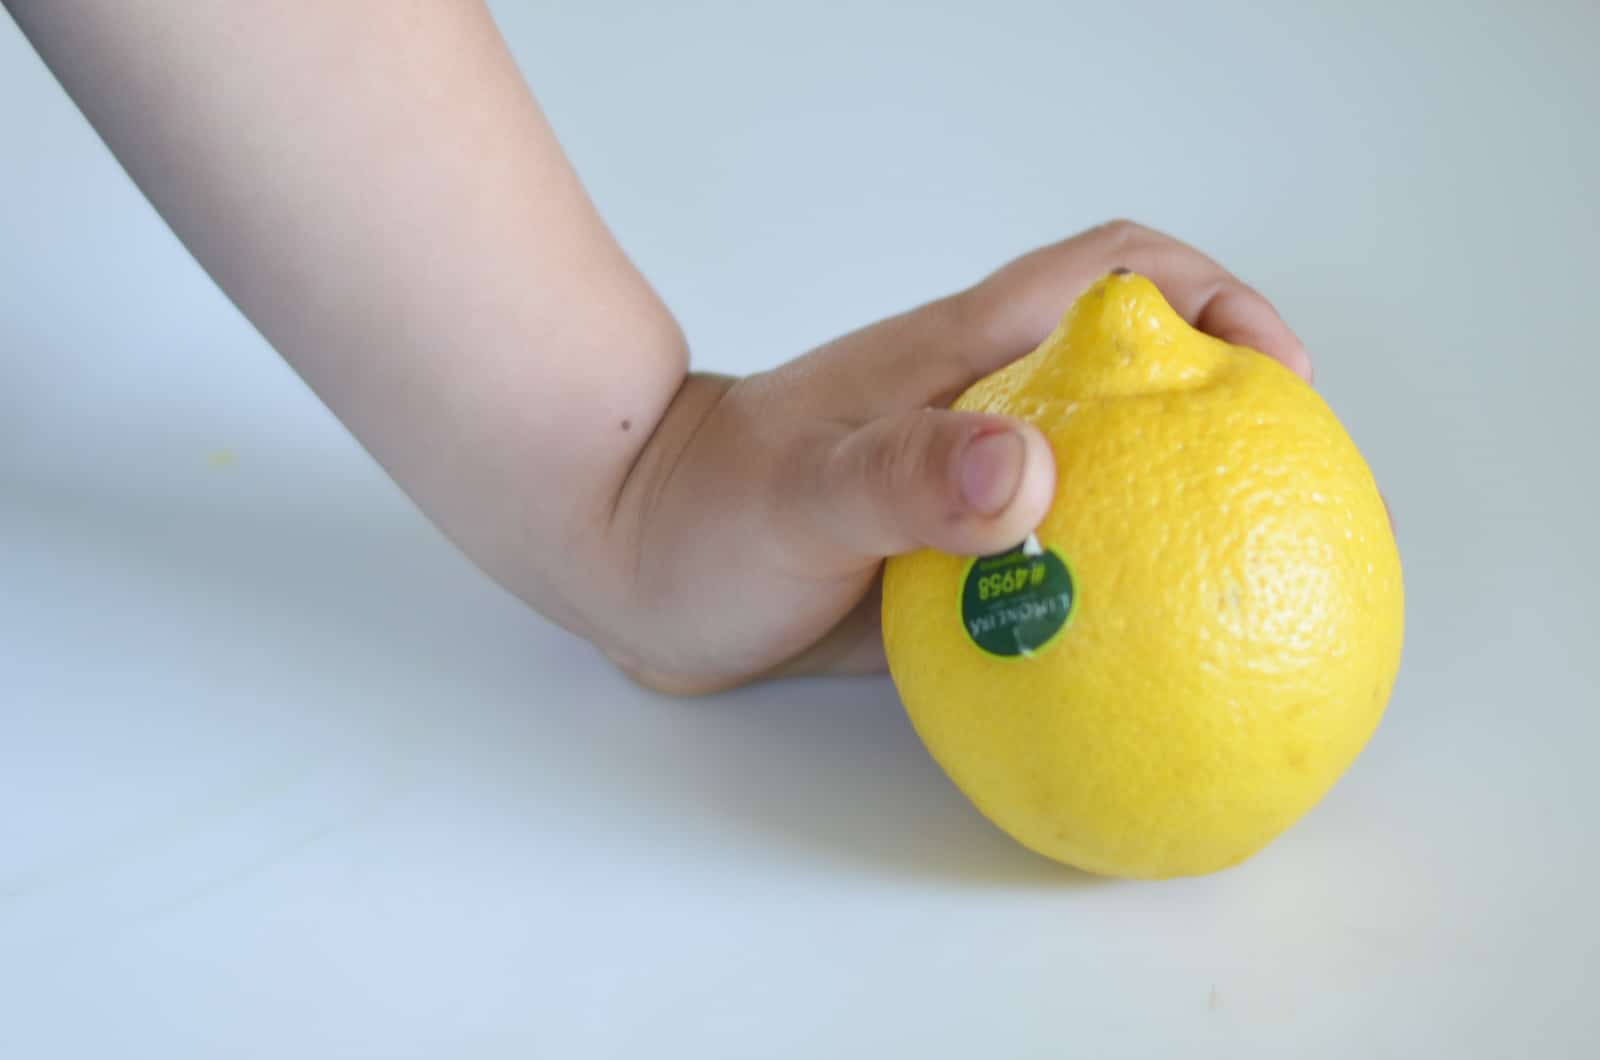 roll the lemons to get more juice out of them